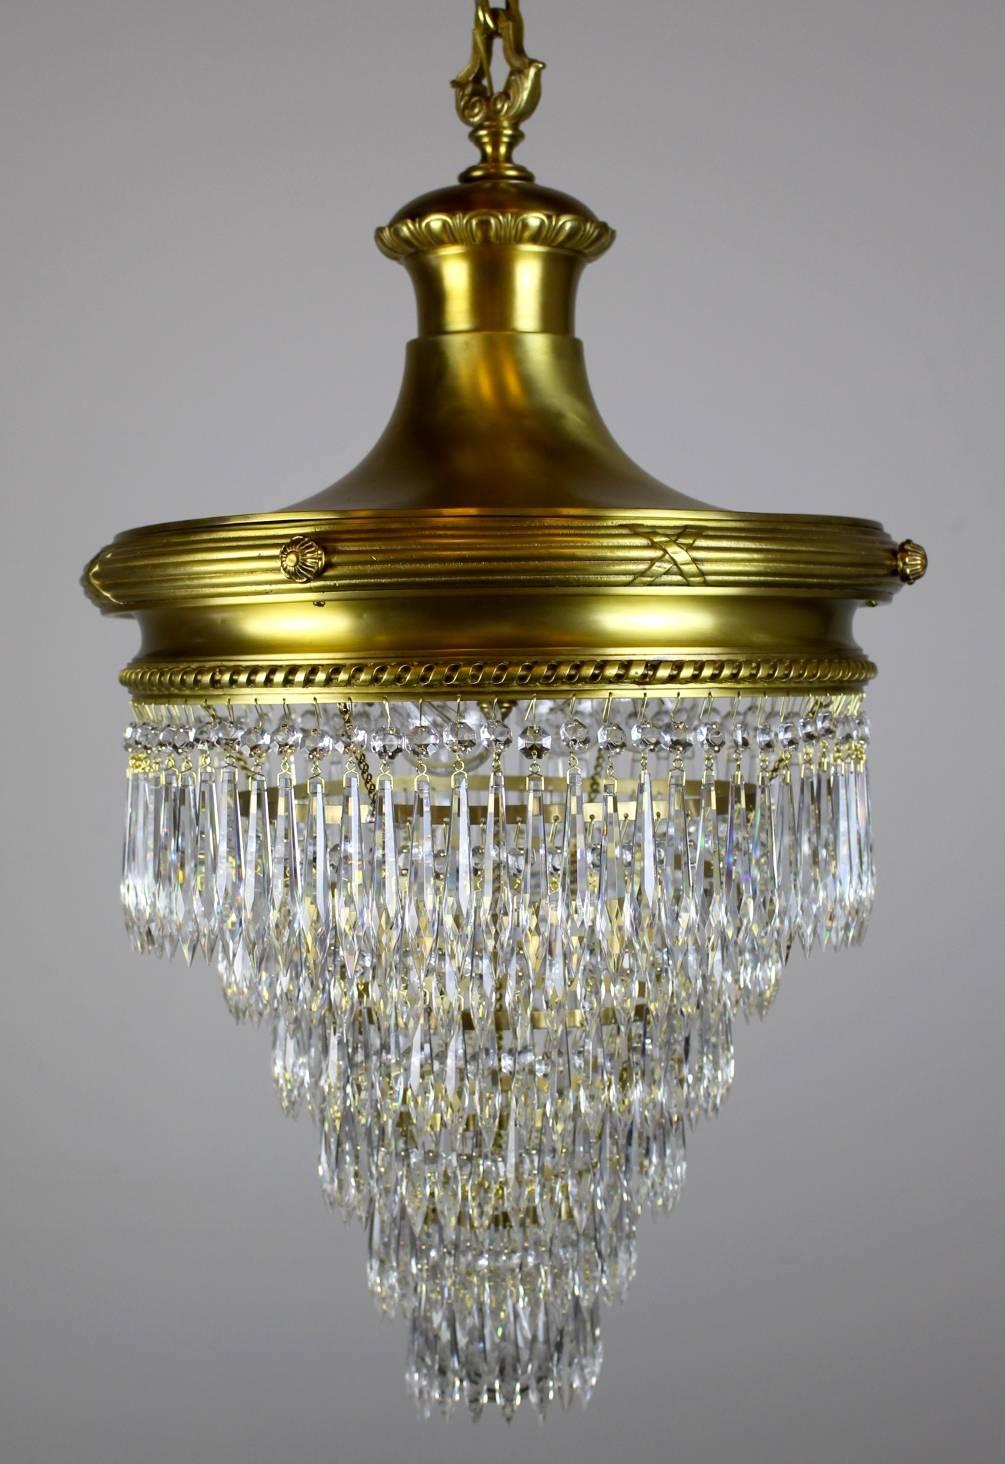 'Wedding Cake' Chandelier by R. Williamson In Excellent Condition For Sale In Vancouver, BC